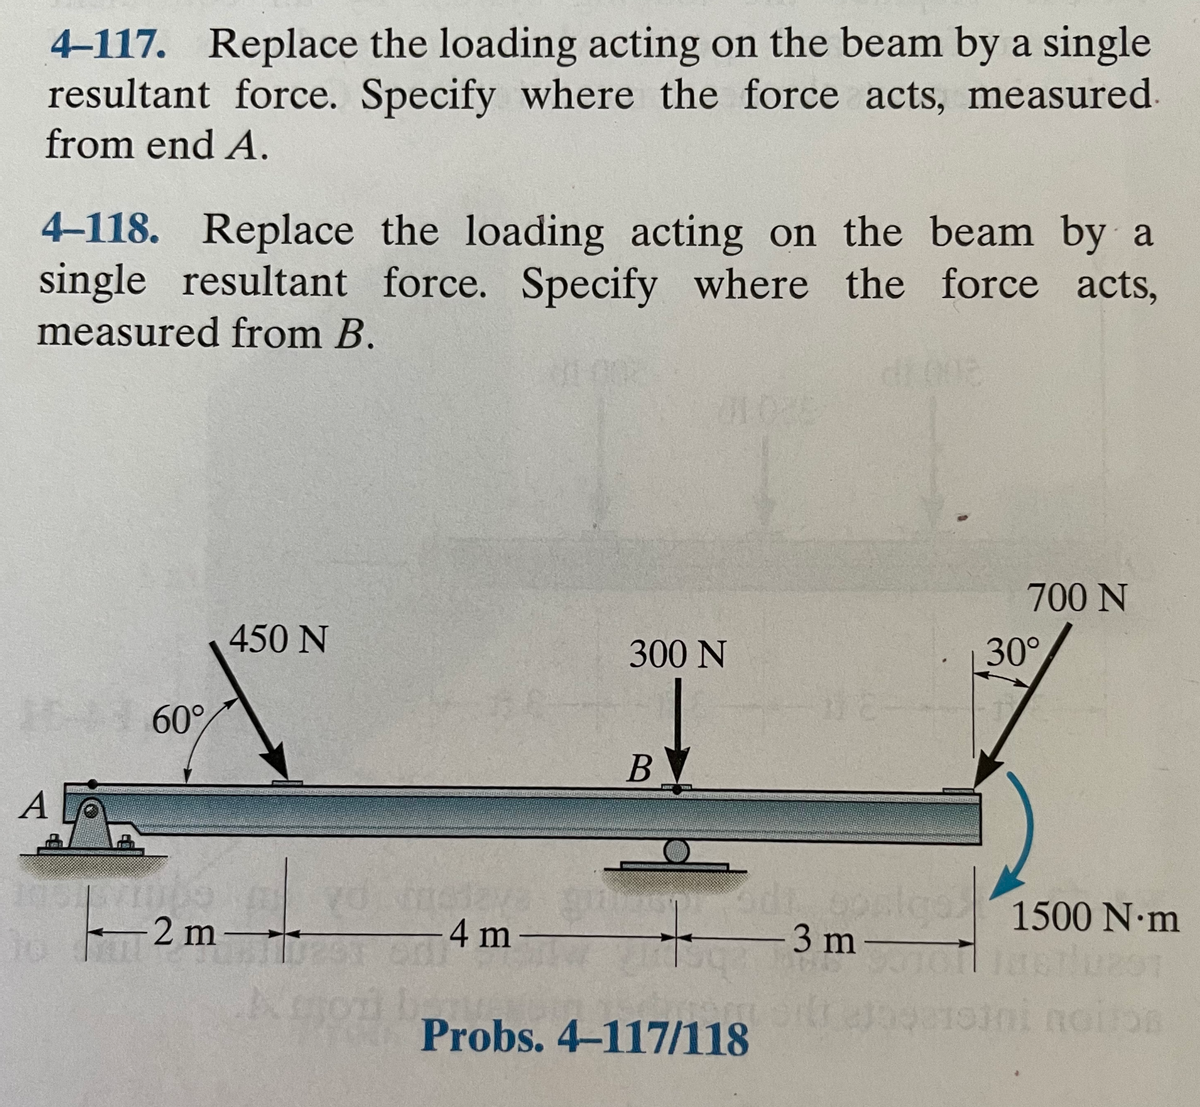 4-117. Replace the loading acting on the beam by a single
resultant force. Specify where the force acts, measured-
from end A.
4-118. Replace the loading acting on the beam by a
single resultant force. Specify where the force acts,
measured from B.
700 N
450 N
300 N
30°
60
В
2 m
go1500 N-m
4 m
3 m
- -
Probs. 4-117/118
oini noion
